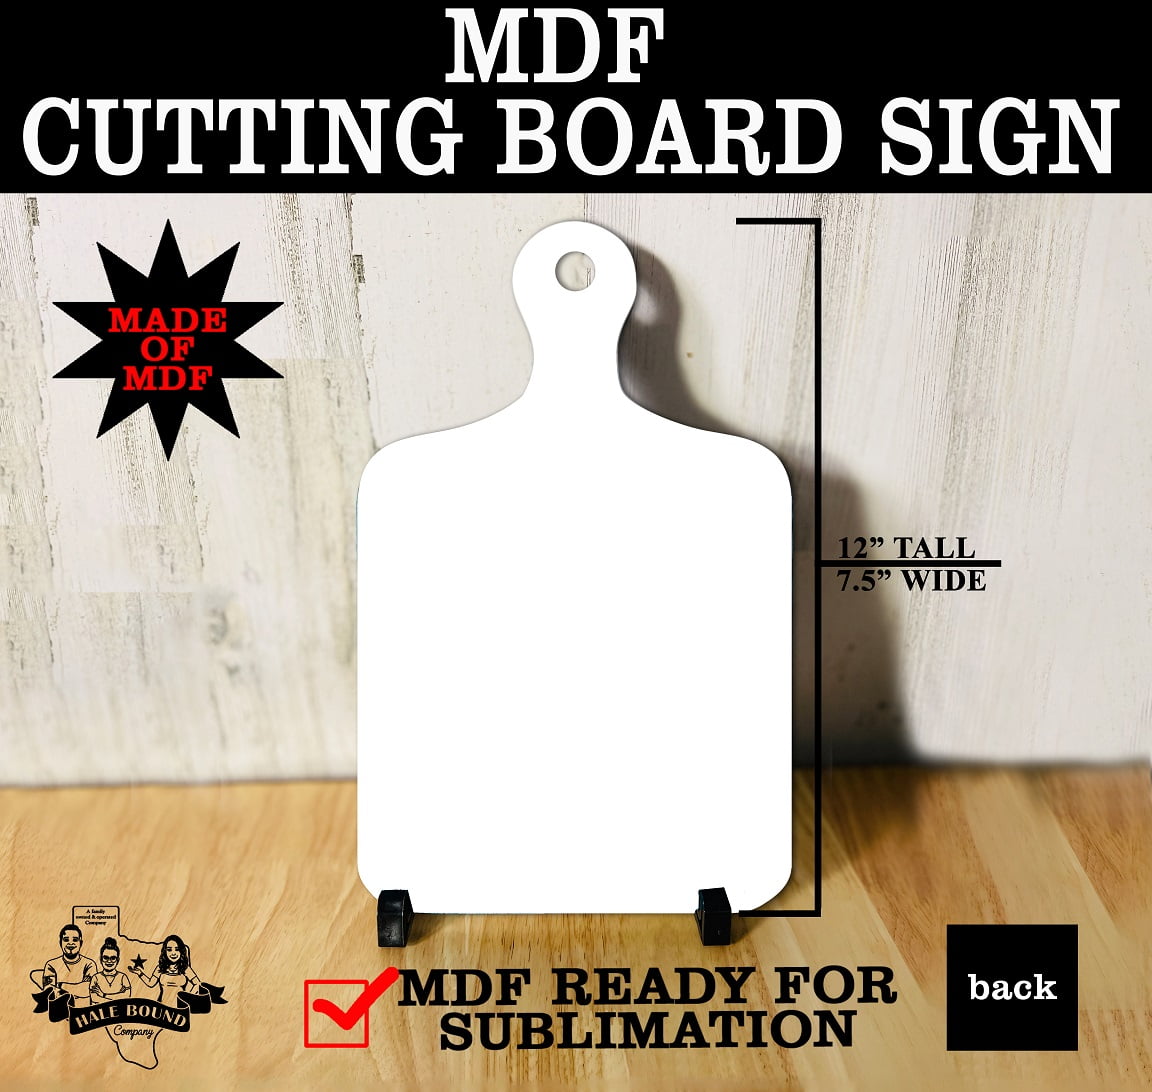 CUTTING BOARD SIGN - BLANK FOR SUBLIMATION